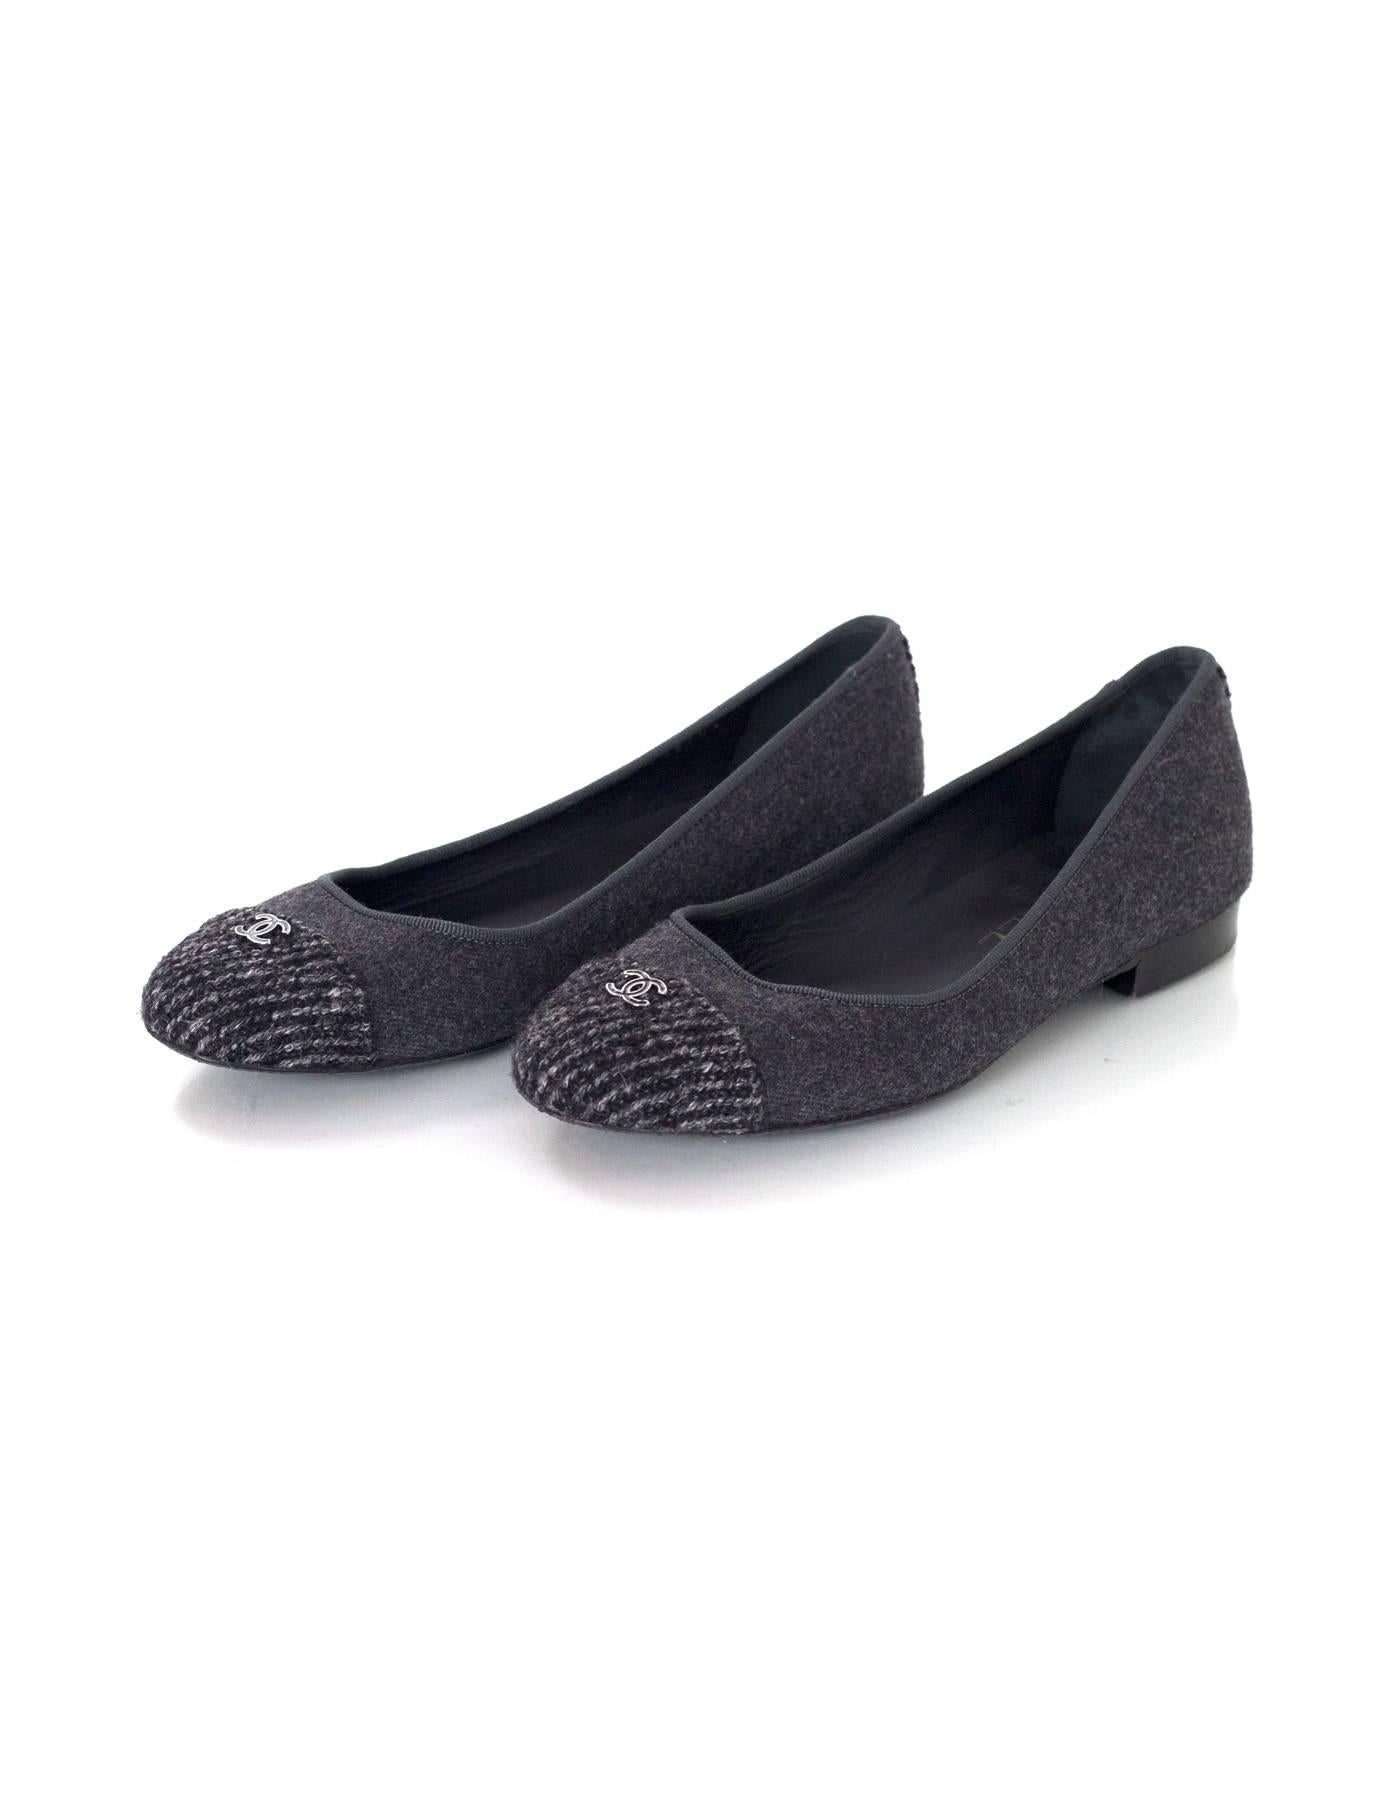 Chanel Grey Felted Ballet Flats 
Features black and grey tweed at toe cap with CC charm on top

Made In: Italy
Color: Grey and black
Materials: Felted wool
Closure/Opening: Slide on
Sole Stamp: CC Made in Italy 37
Overall Condition: Excellent